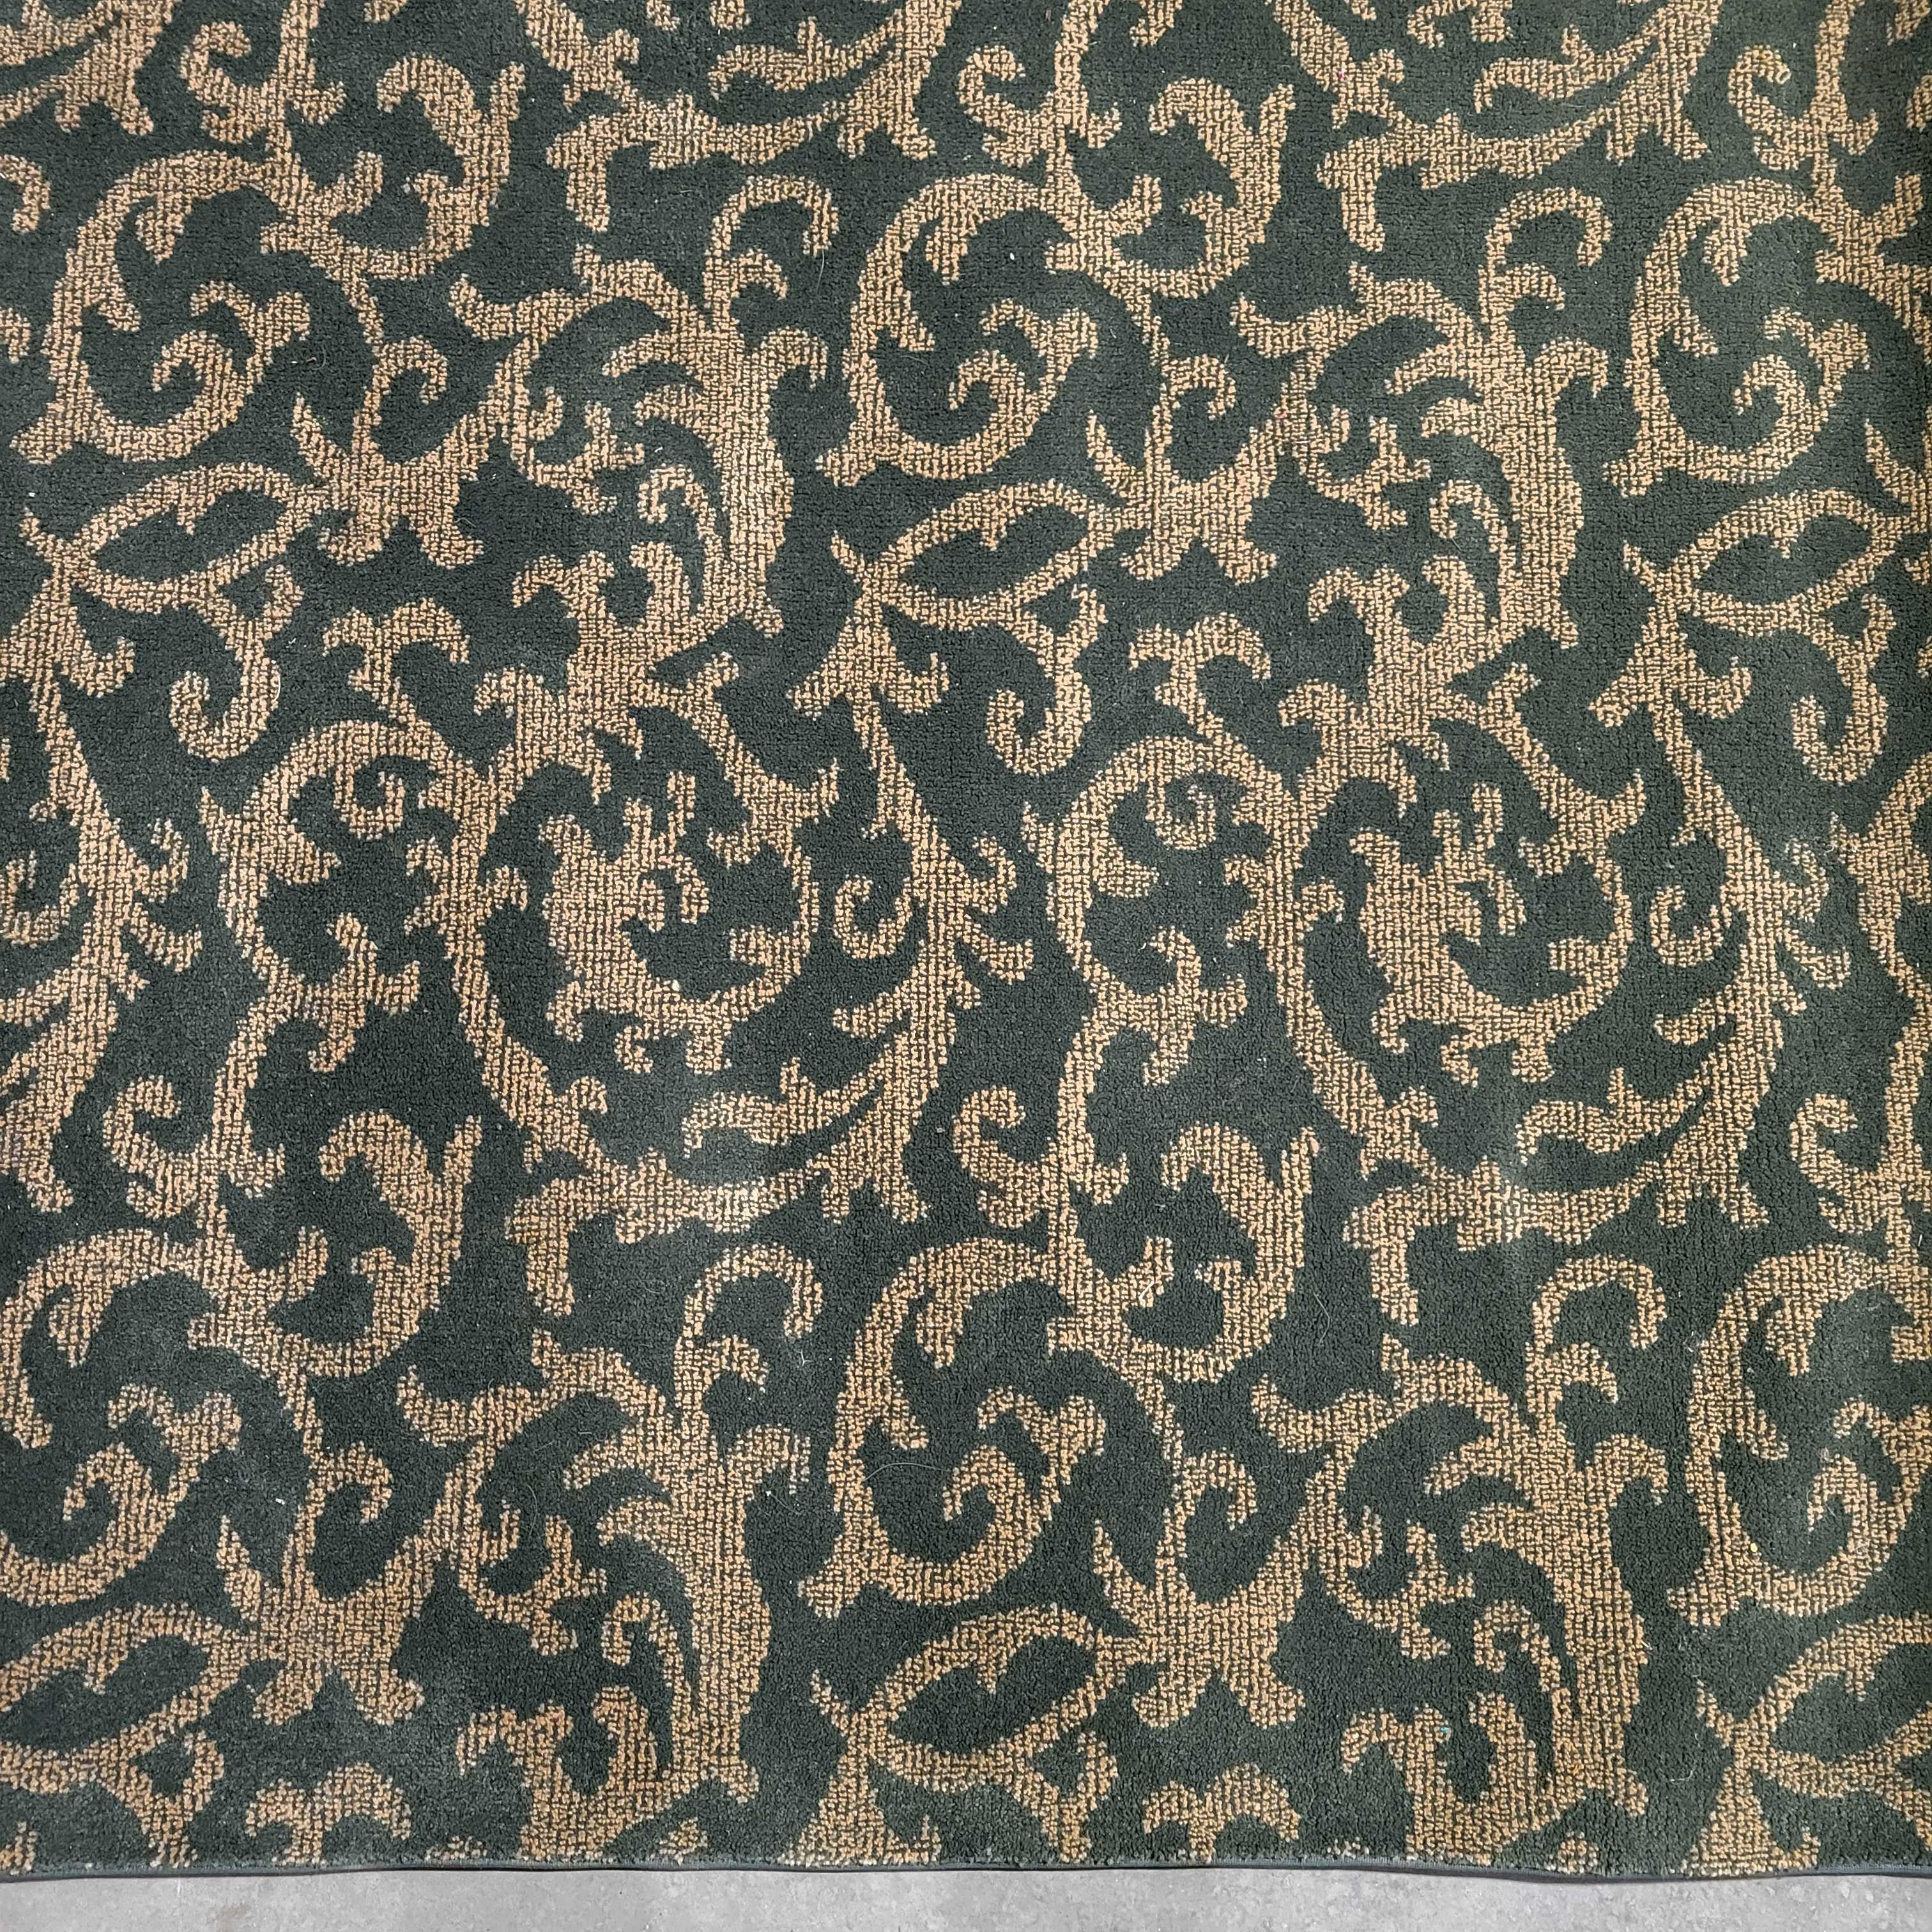 7'6"x 11' Green and Gold Scroll Leaf Few Stains with Pad Rug